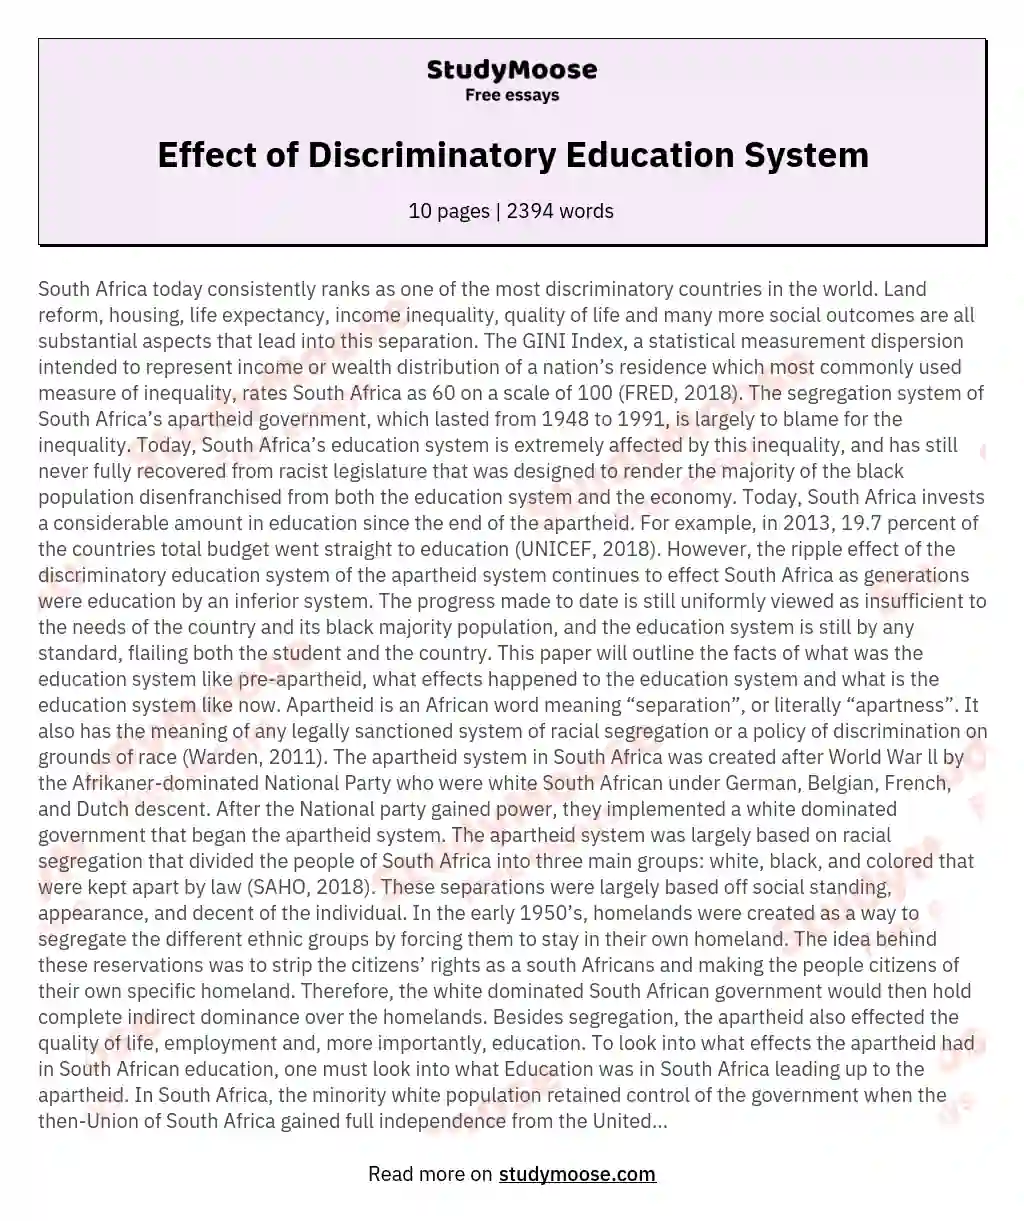 Effect of Discriminatory Education System